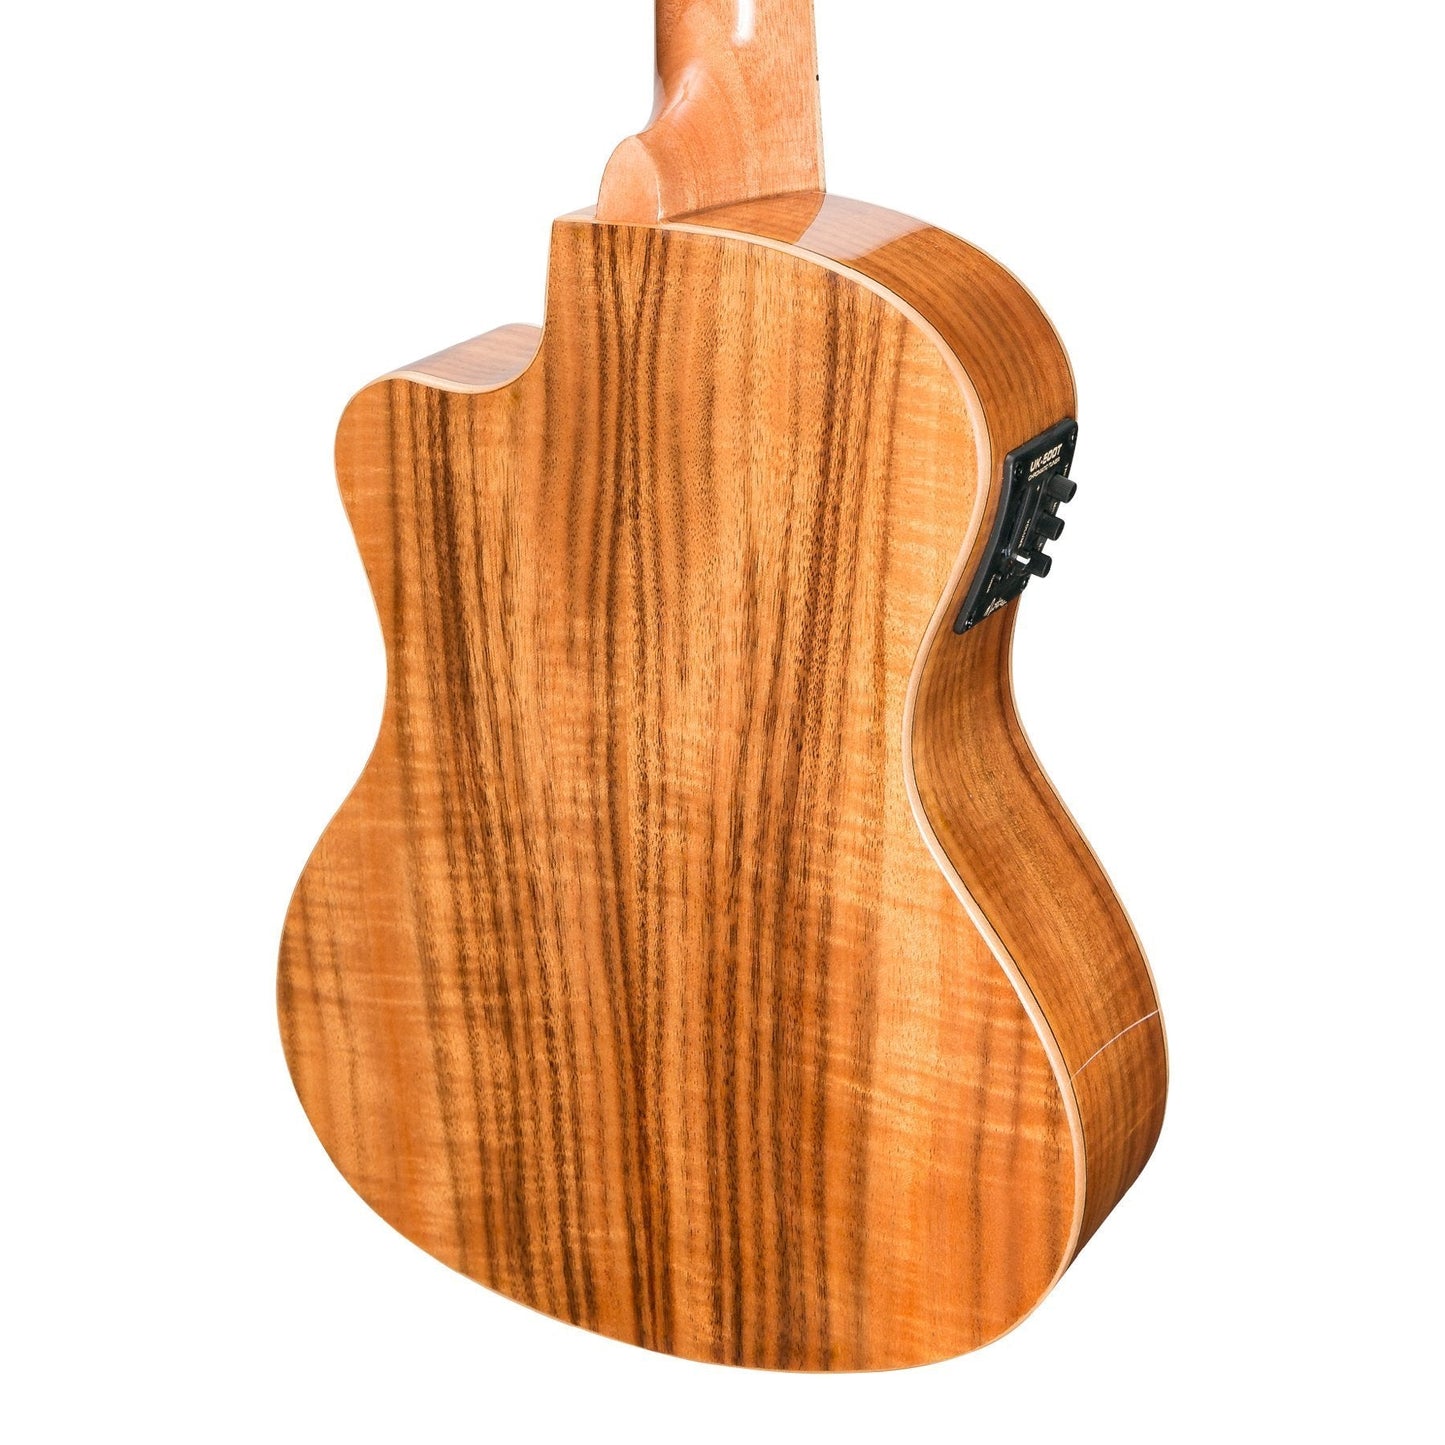 Martinez 'Southern Belle 8 Series' Koa Solid Top Electric Cutaway Tenor Ukulele with Hard Case (Natural Gloss)